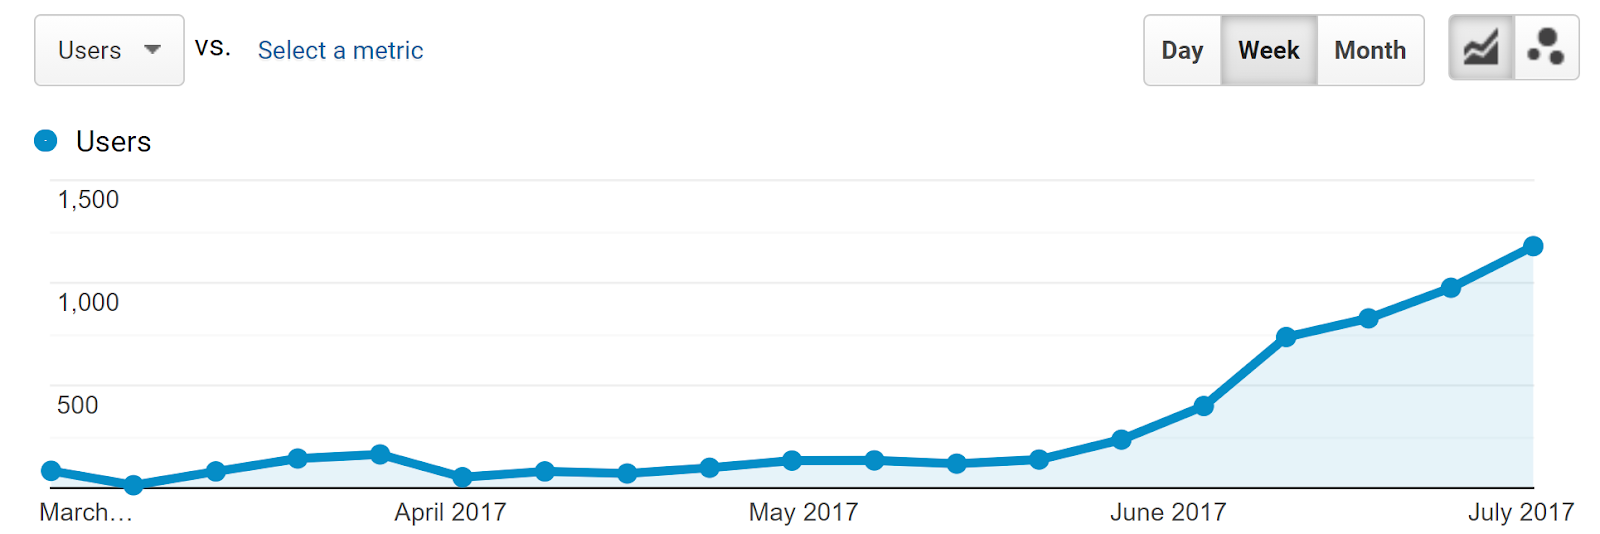 Google Analytics screenshot showing slow and inconsistent website traffic growth for 3-4 months followed by 1-2 months of rapid growth.